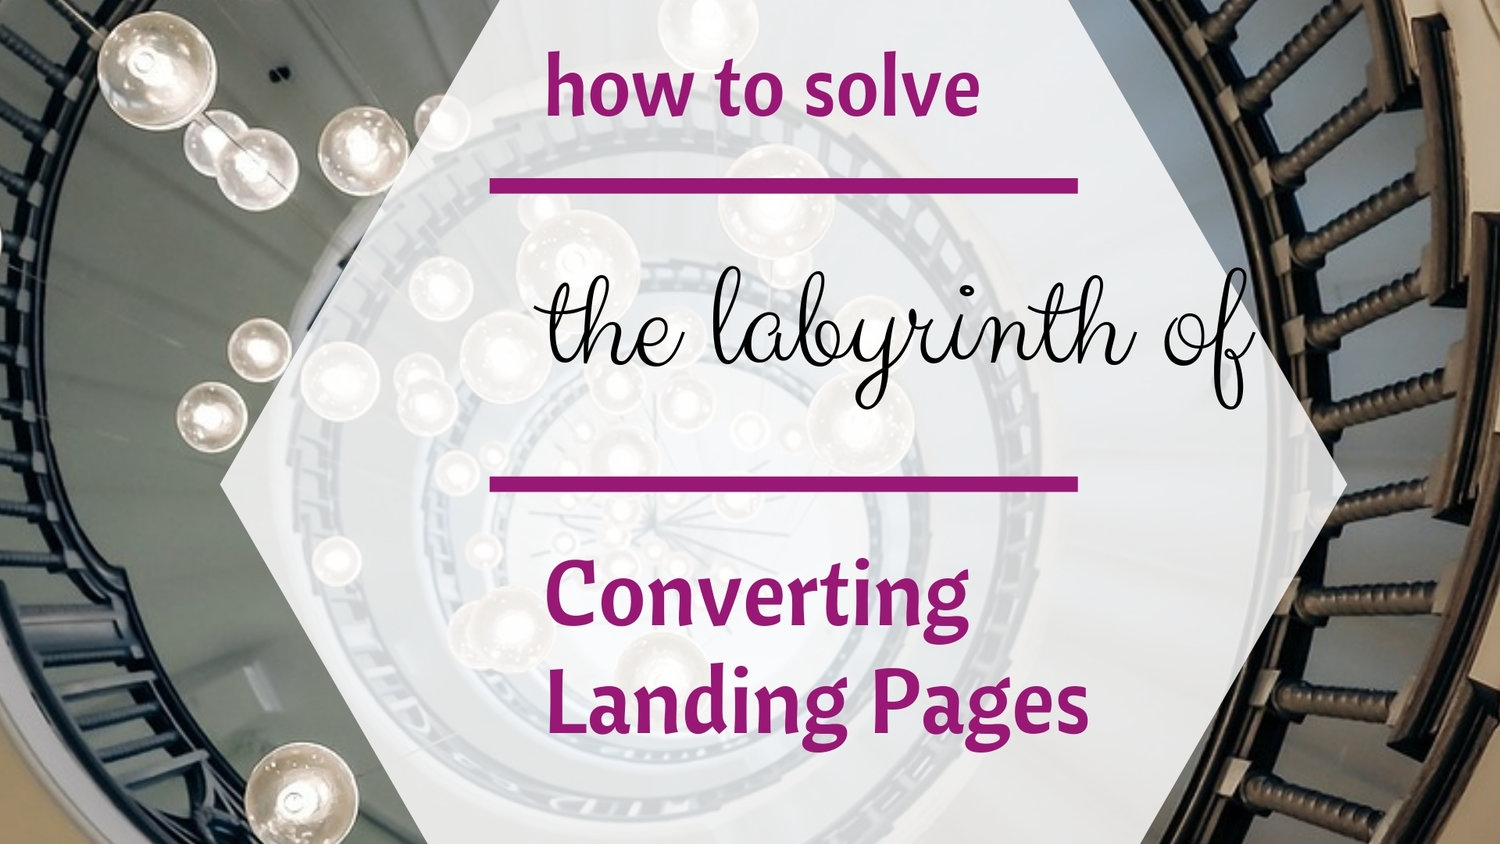 Landing Pages Best Practices! How to Solve the Labyrinth of Converting Landing Pages